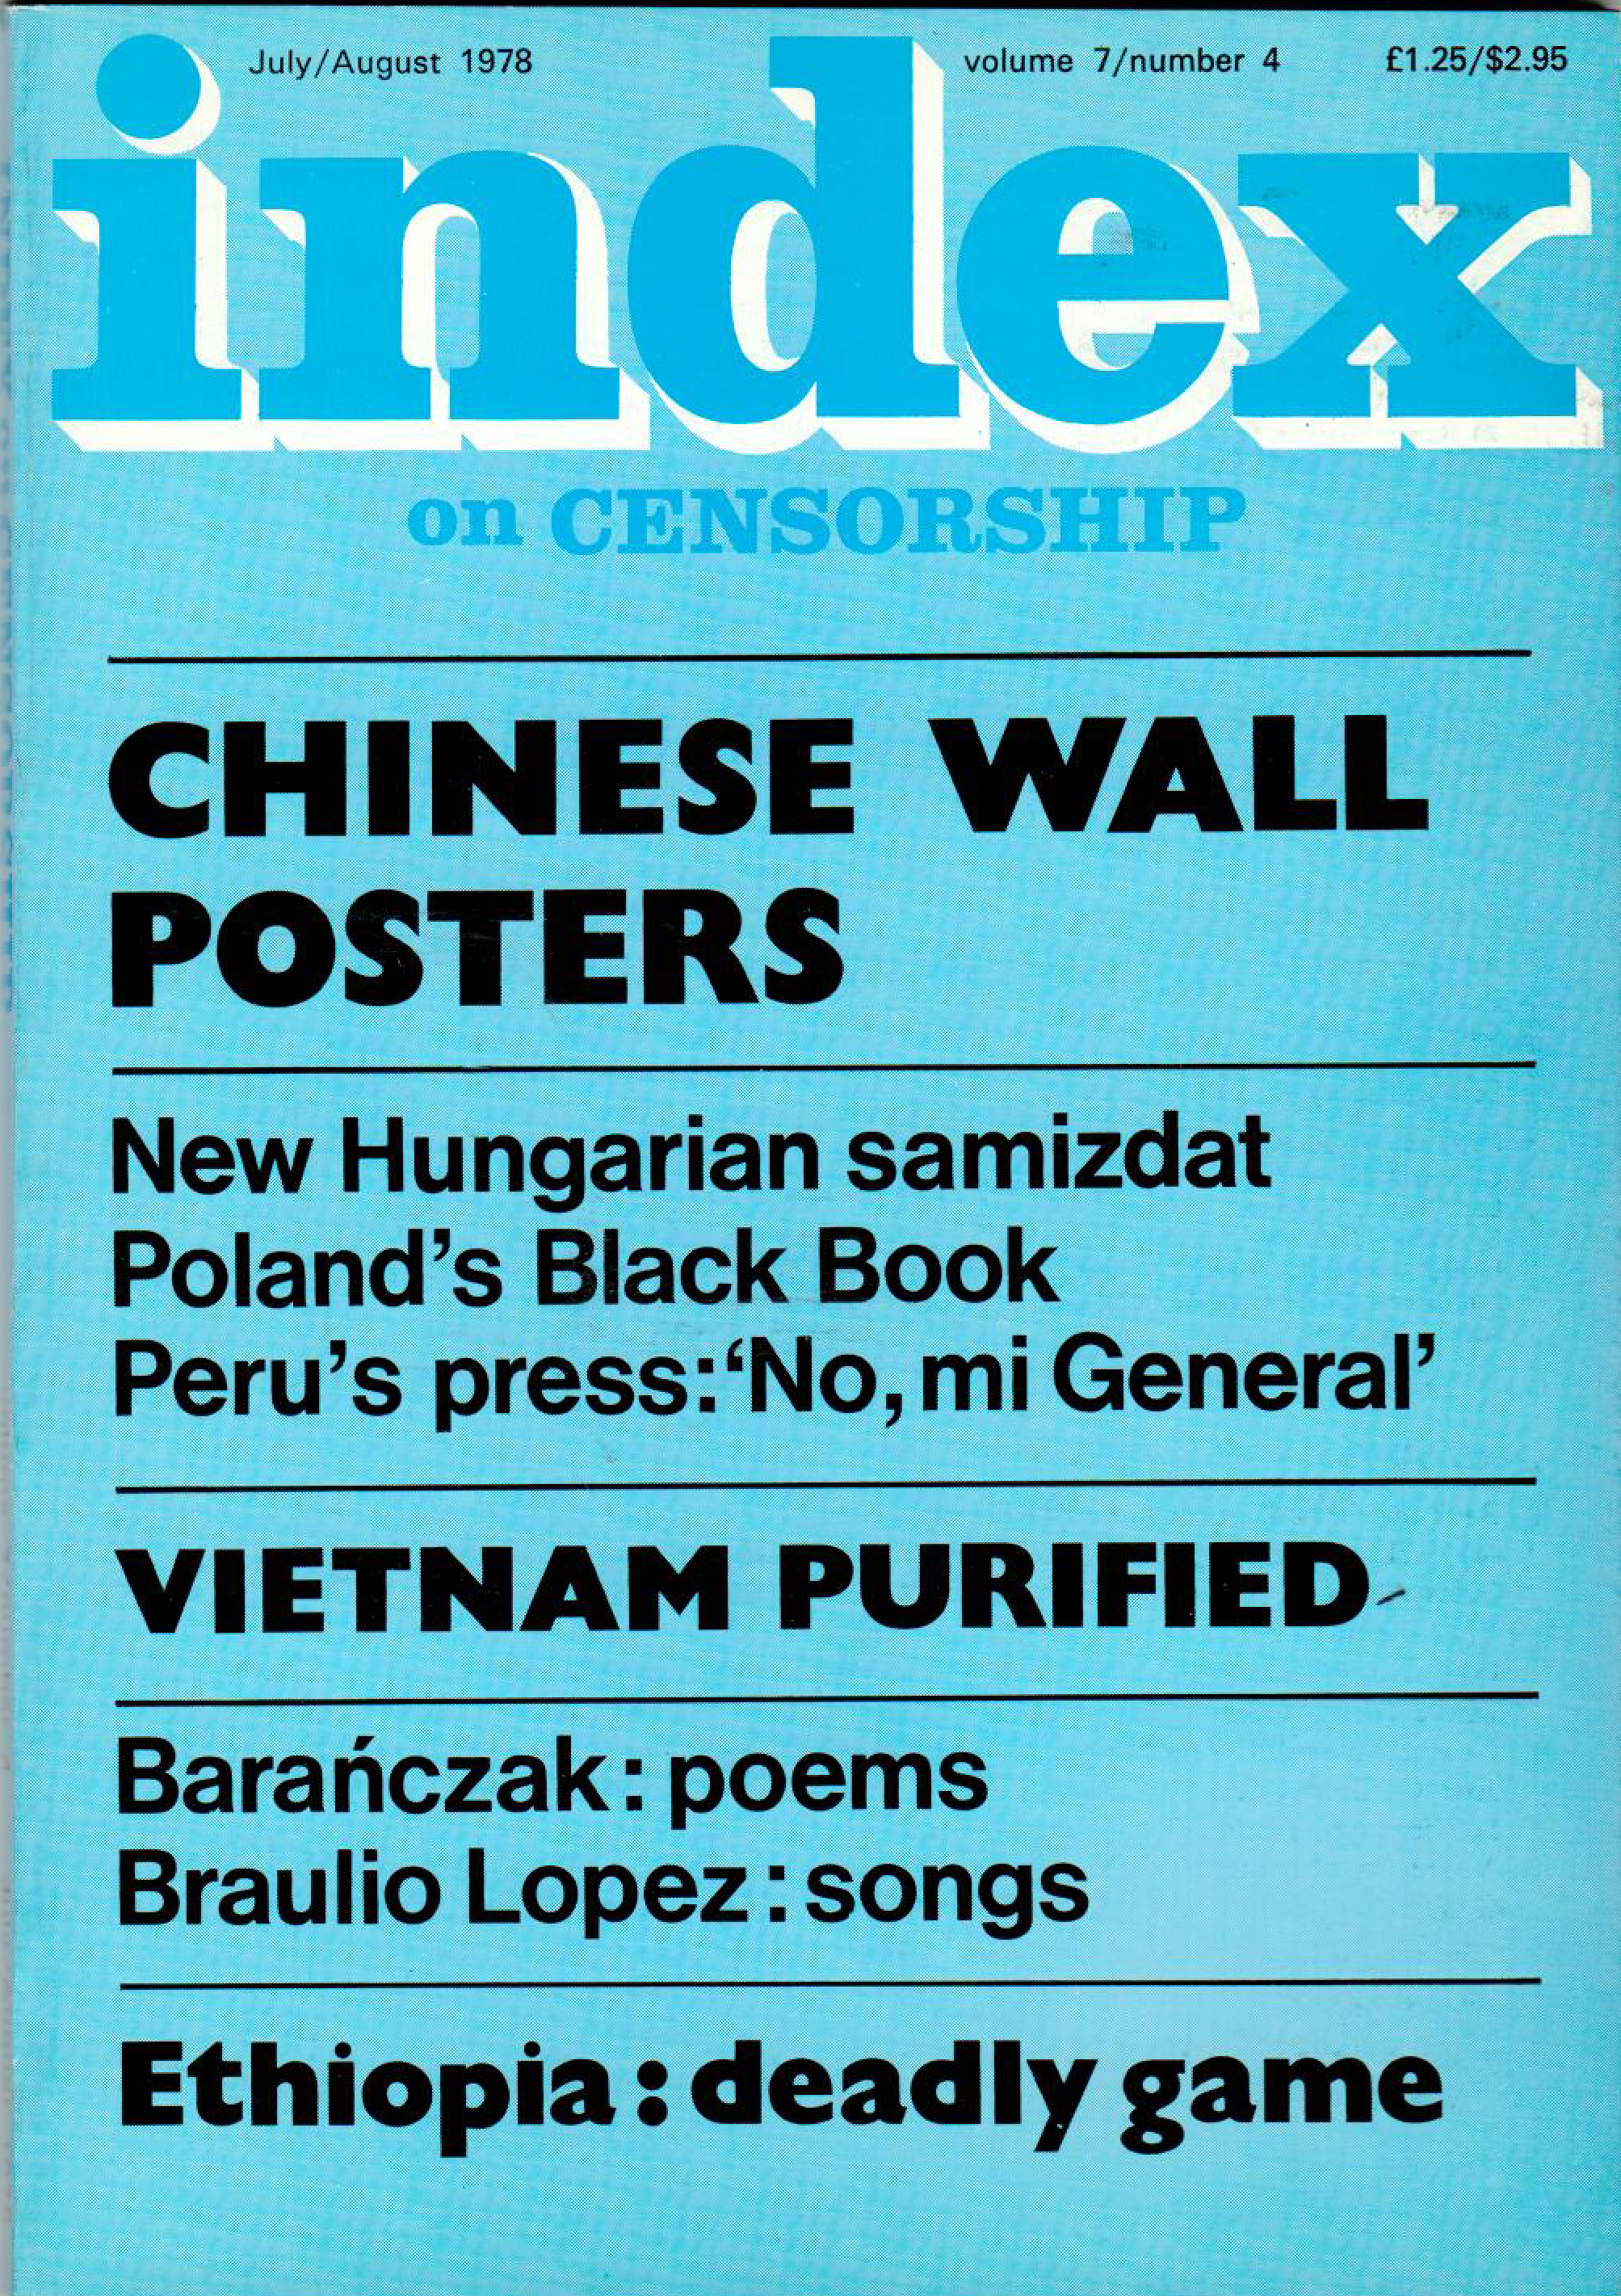 Chinese wall posters